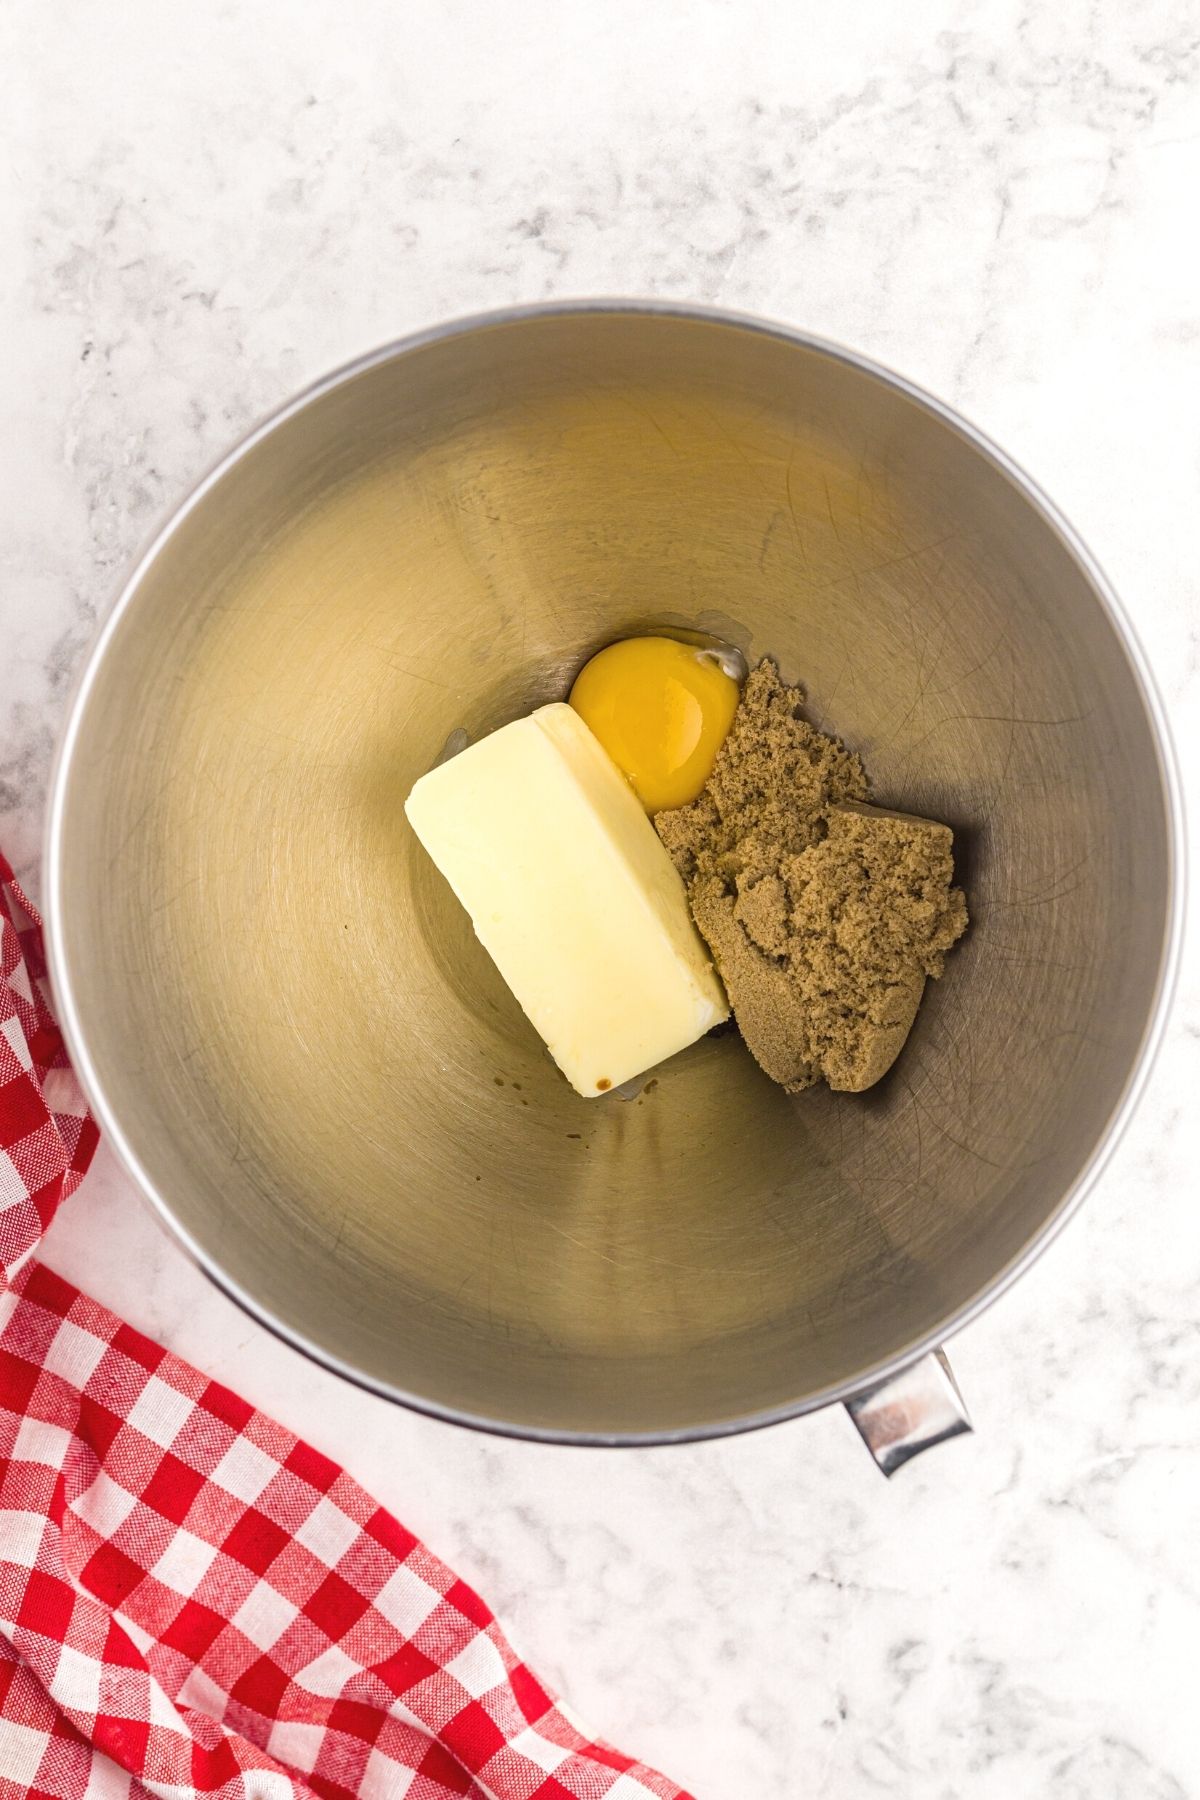 Butter, sugar, egg, and vanilla in a mixing bowl